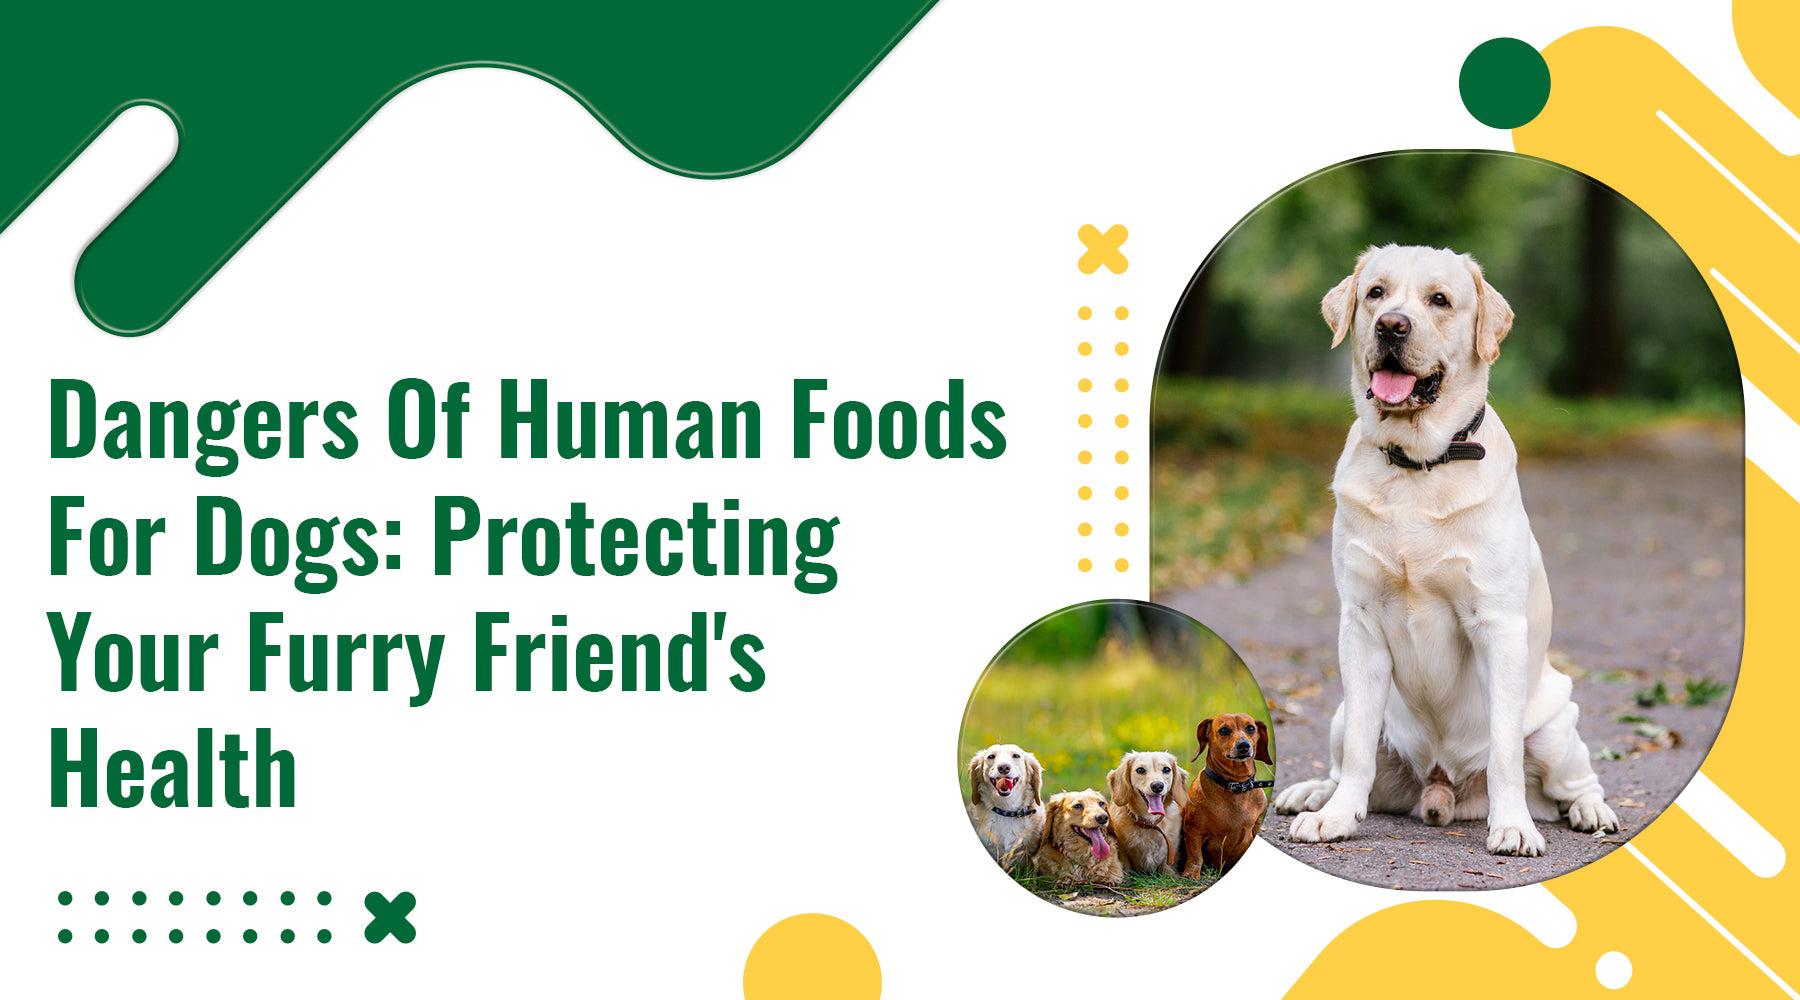 Dangers of Human Foods for Dogs: Protecting Your Furry Friend's Health